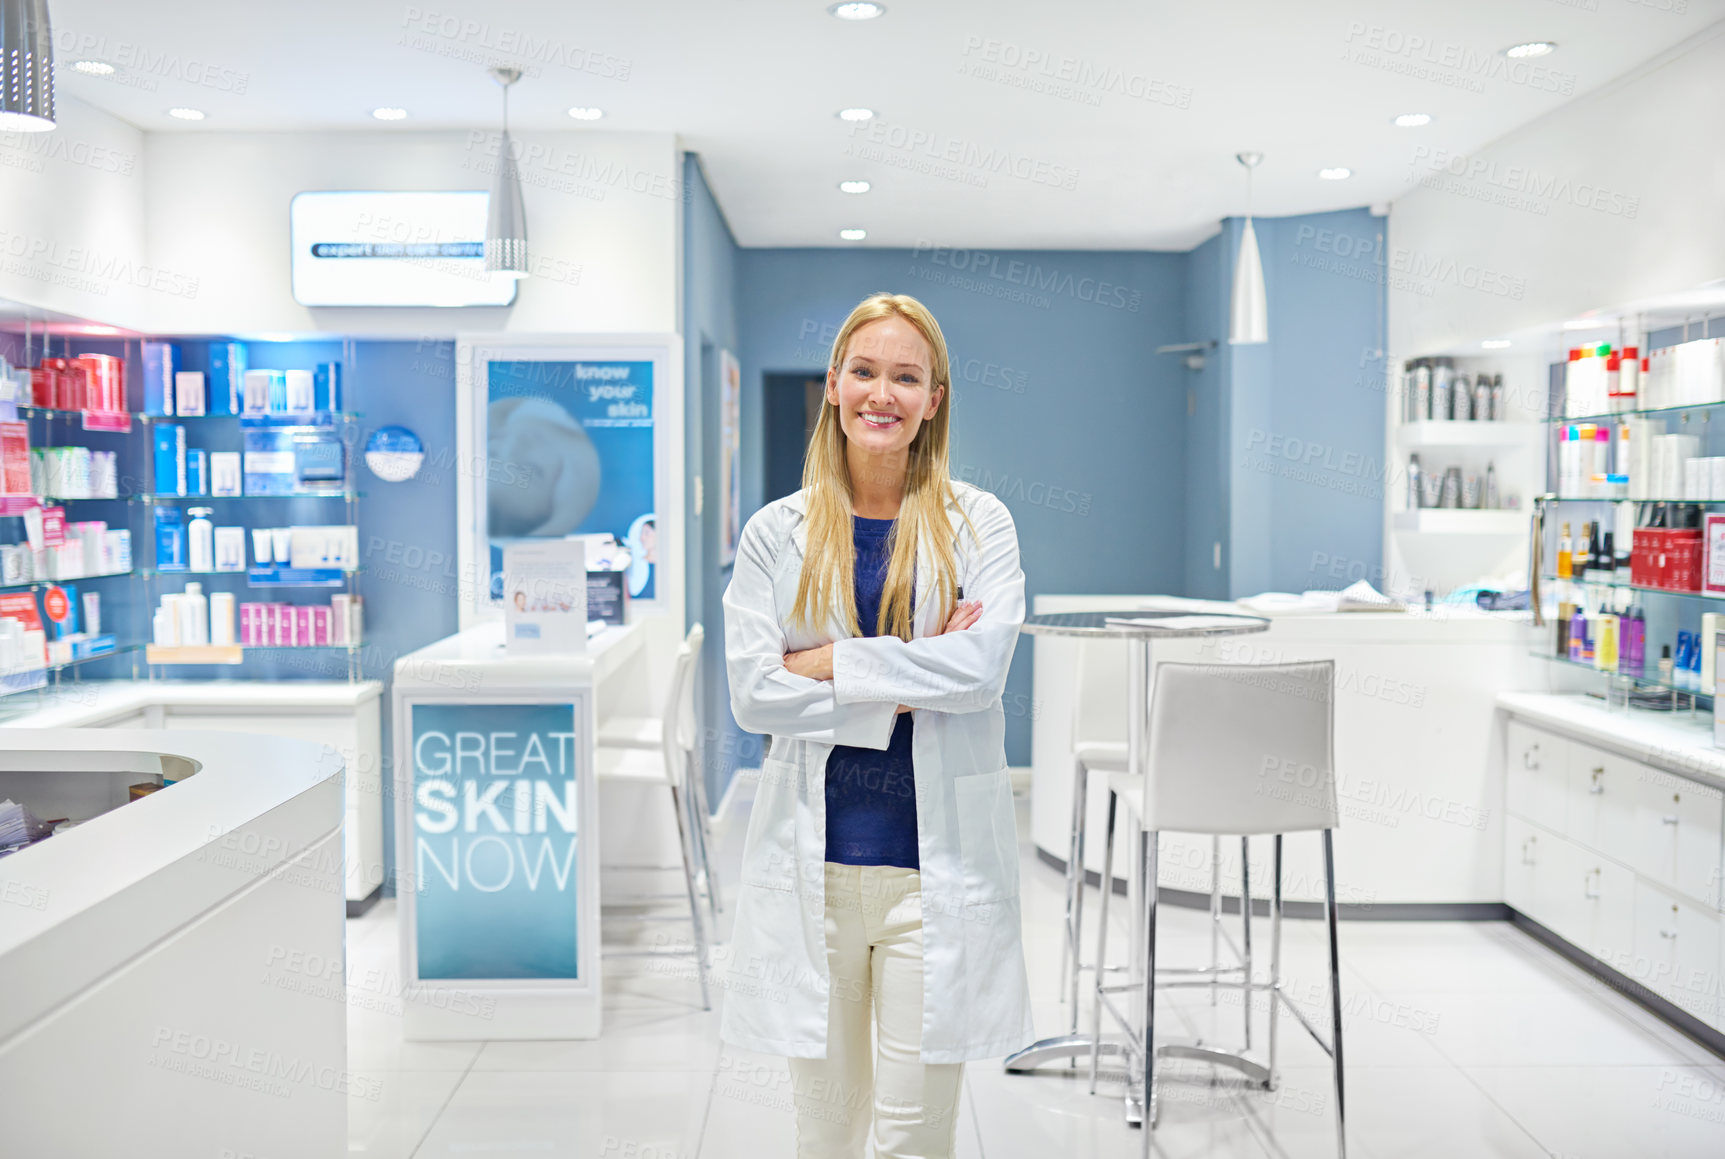 Buy stock photo Portrait of an attractive young woman standing in a cosmetics store